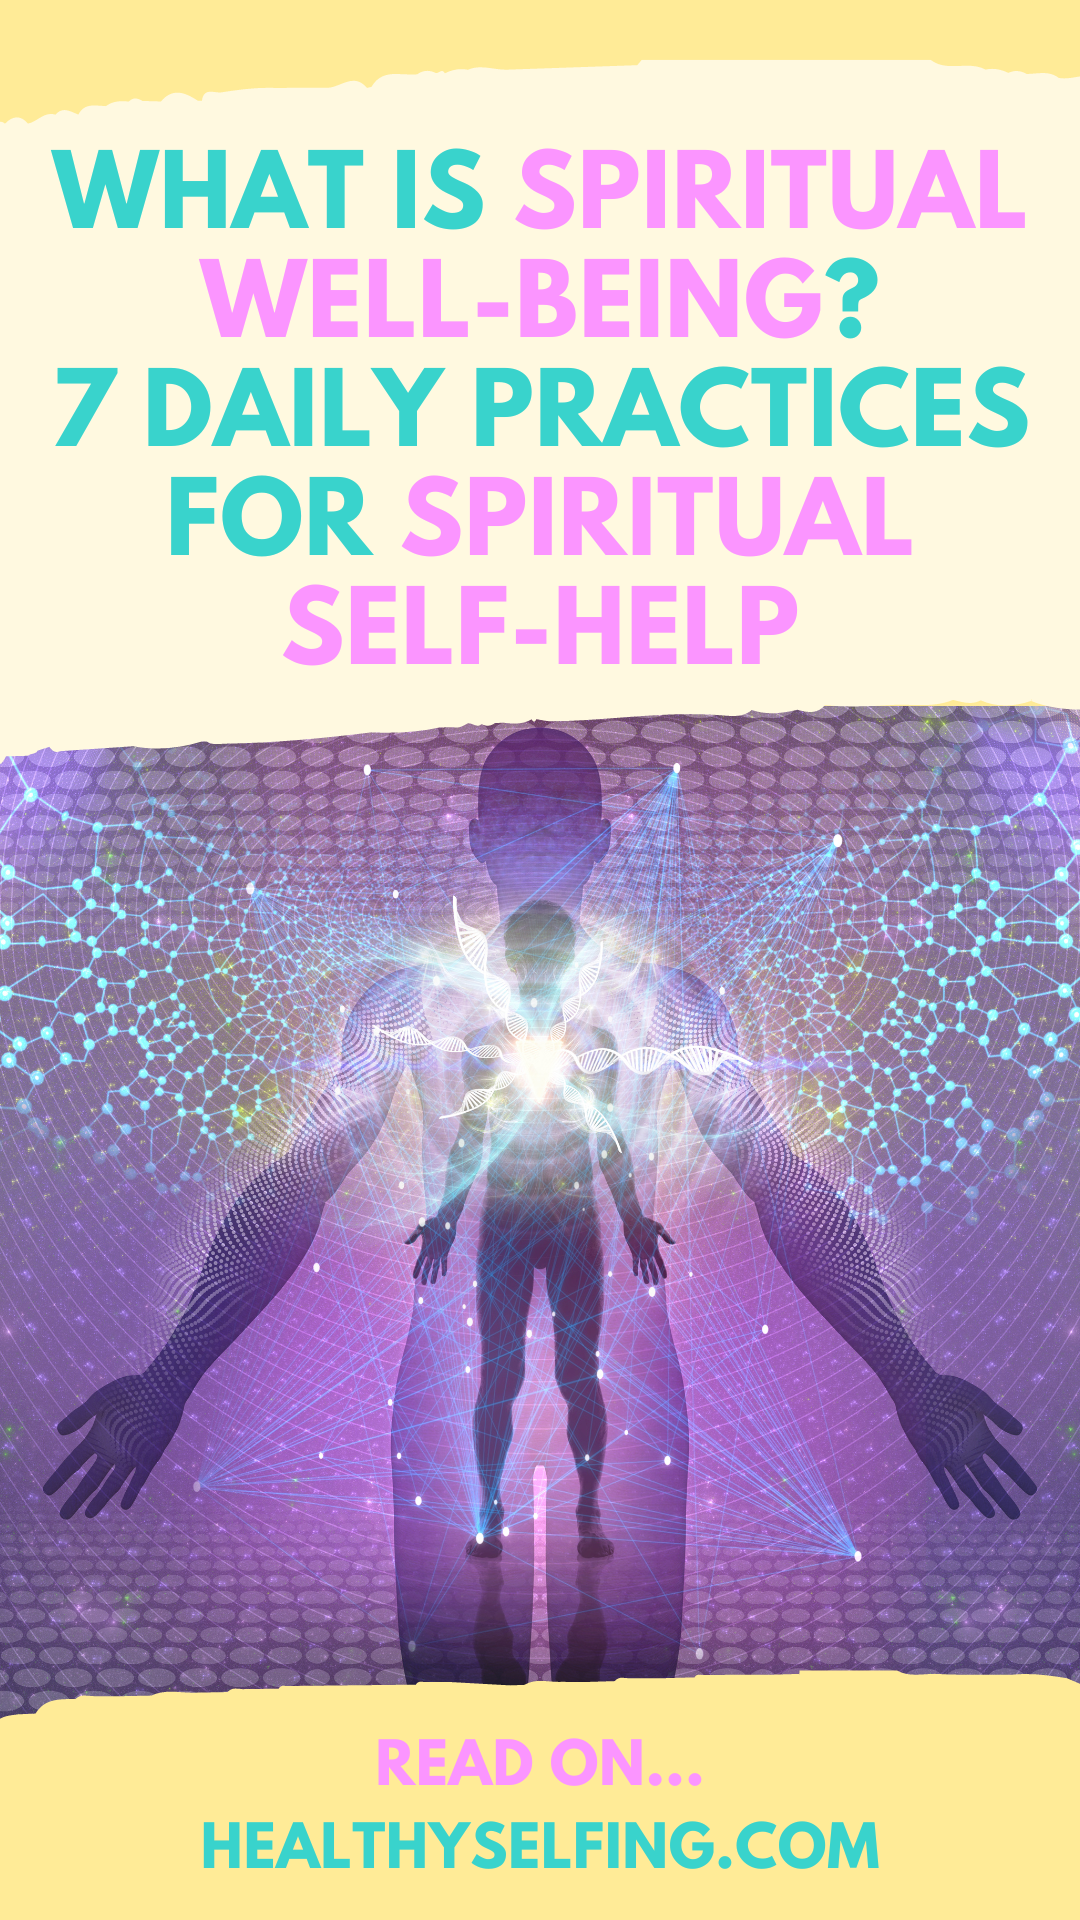 What is Spiritual Well-Being? 7 Daily Practices for Spiritual Self-help